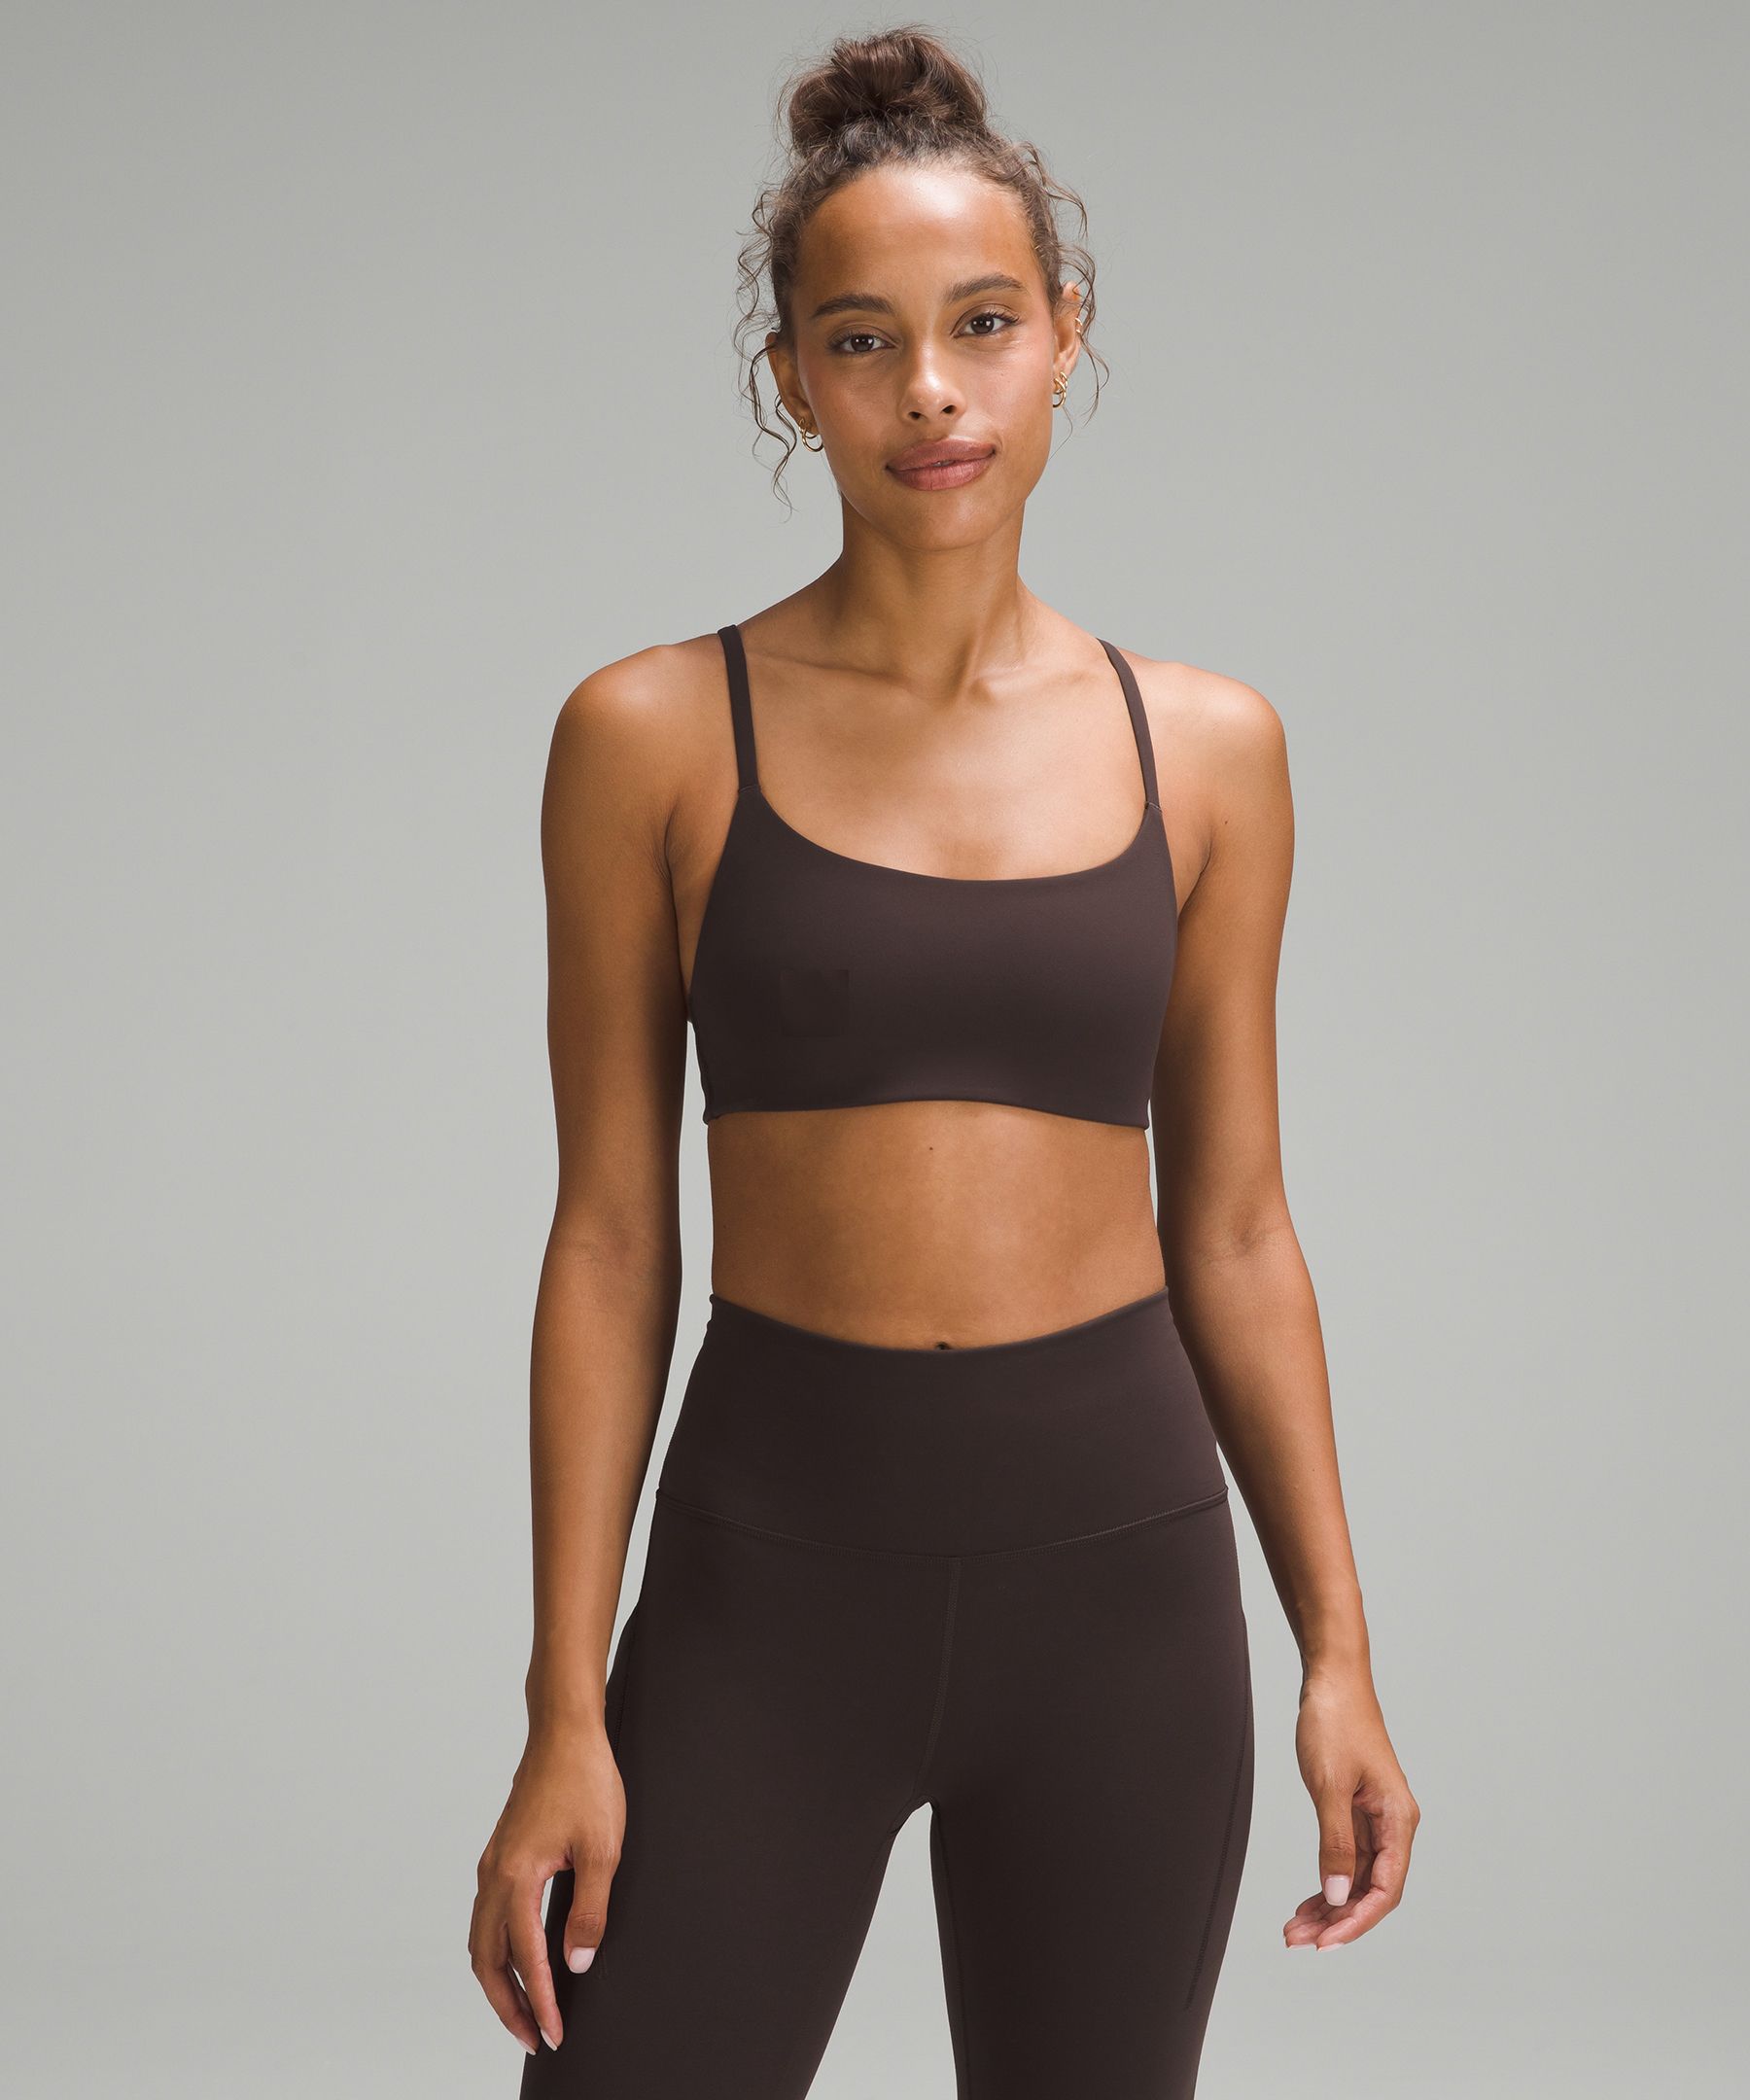 Lululemon Wunder Train Strappy Racer Bra Light Support, A/b Cup